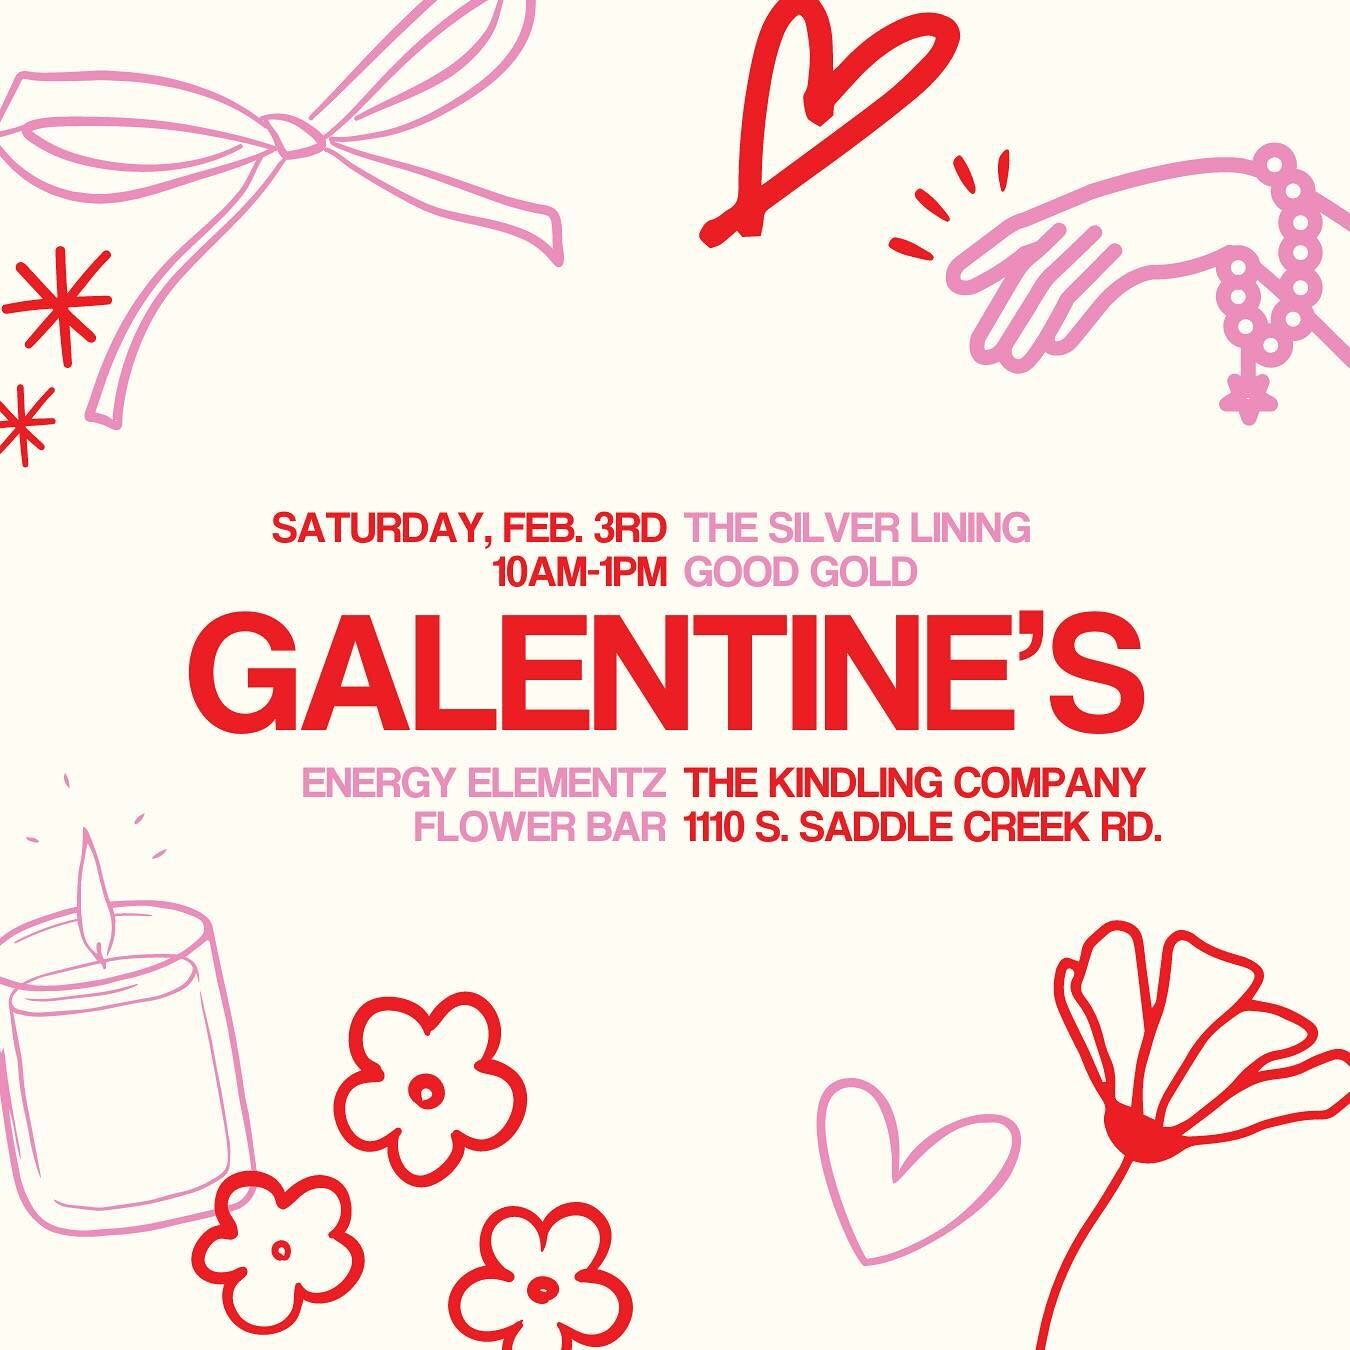 HEY GIRL HEY! 🥰💌🌹🫶 Let&rsquo;s celebrate our Galentines!

We&rsquo;ve got so much fun happening at the shop this Saturday! 10AM-1PM we have all the fixin&rsquo;s for the perfect Galentine (or Valentine) gift - custom jewelry, custom candles, and 